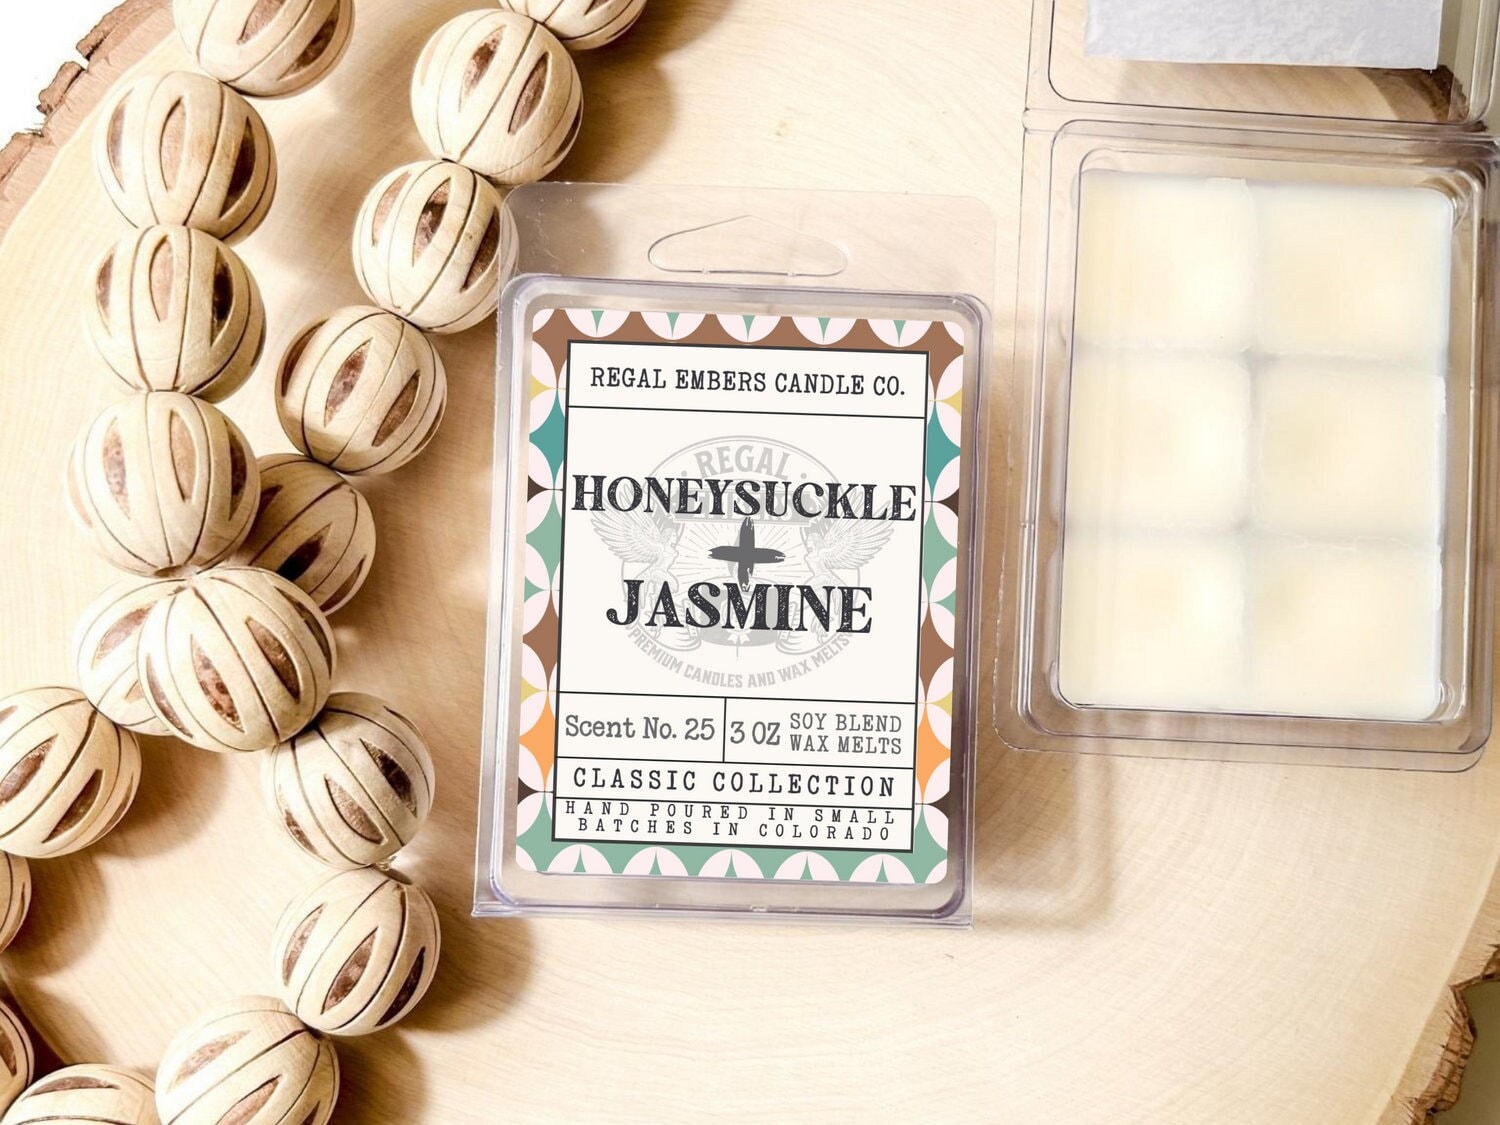  2 Pack - Jasmine Scented Blended Soy Wax Melts by Just Makes  Scents